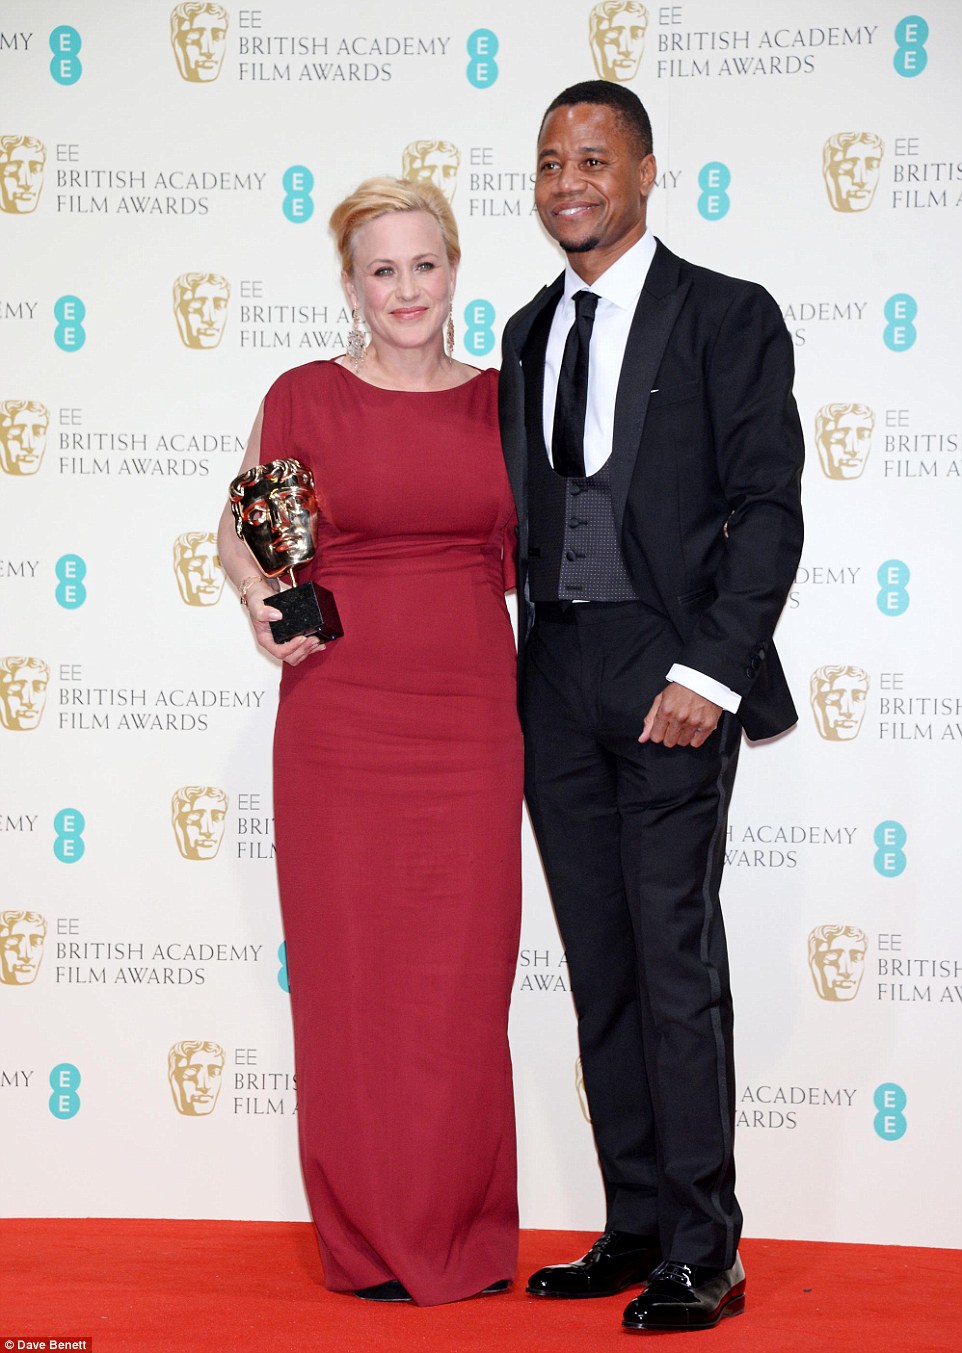 Enjoy the moment: He presented the award to Patricia Arquette, who won Supporting Actress for her role in Boyhood  